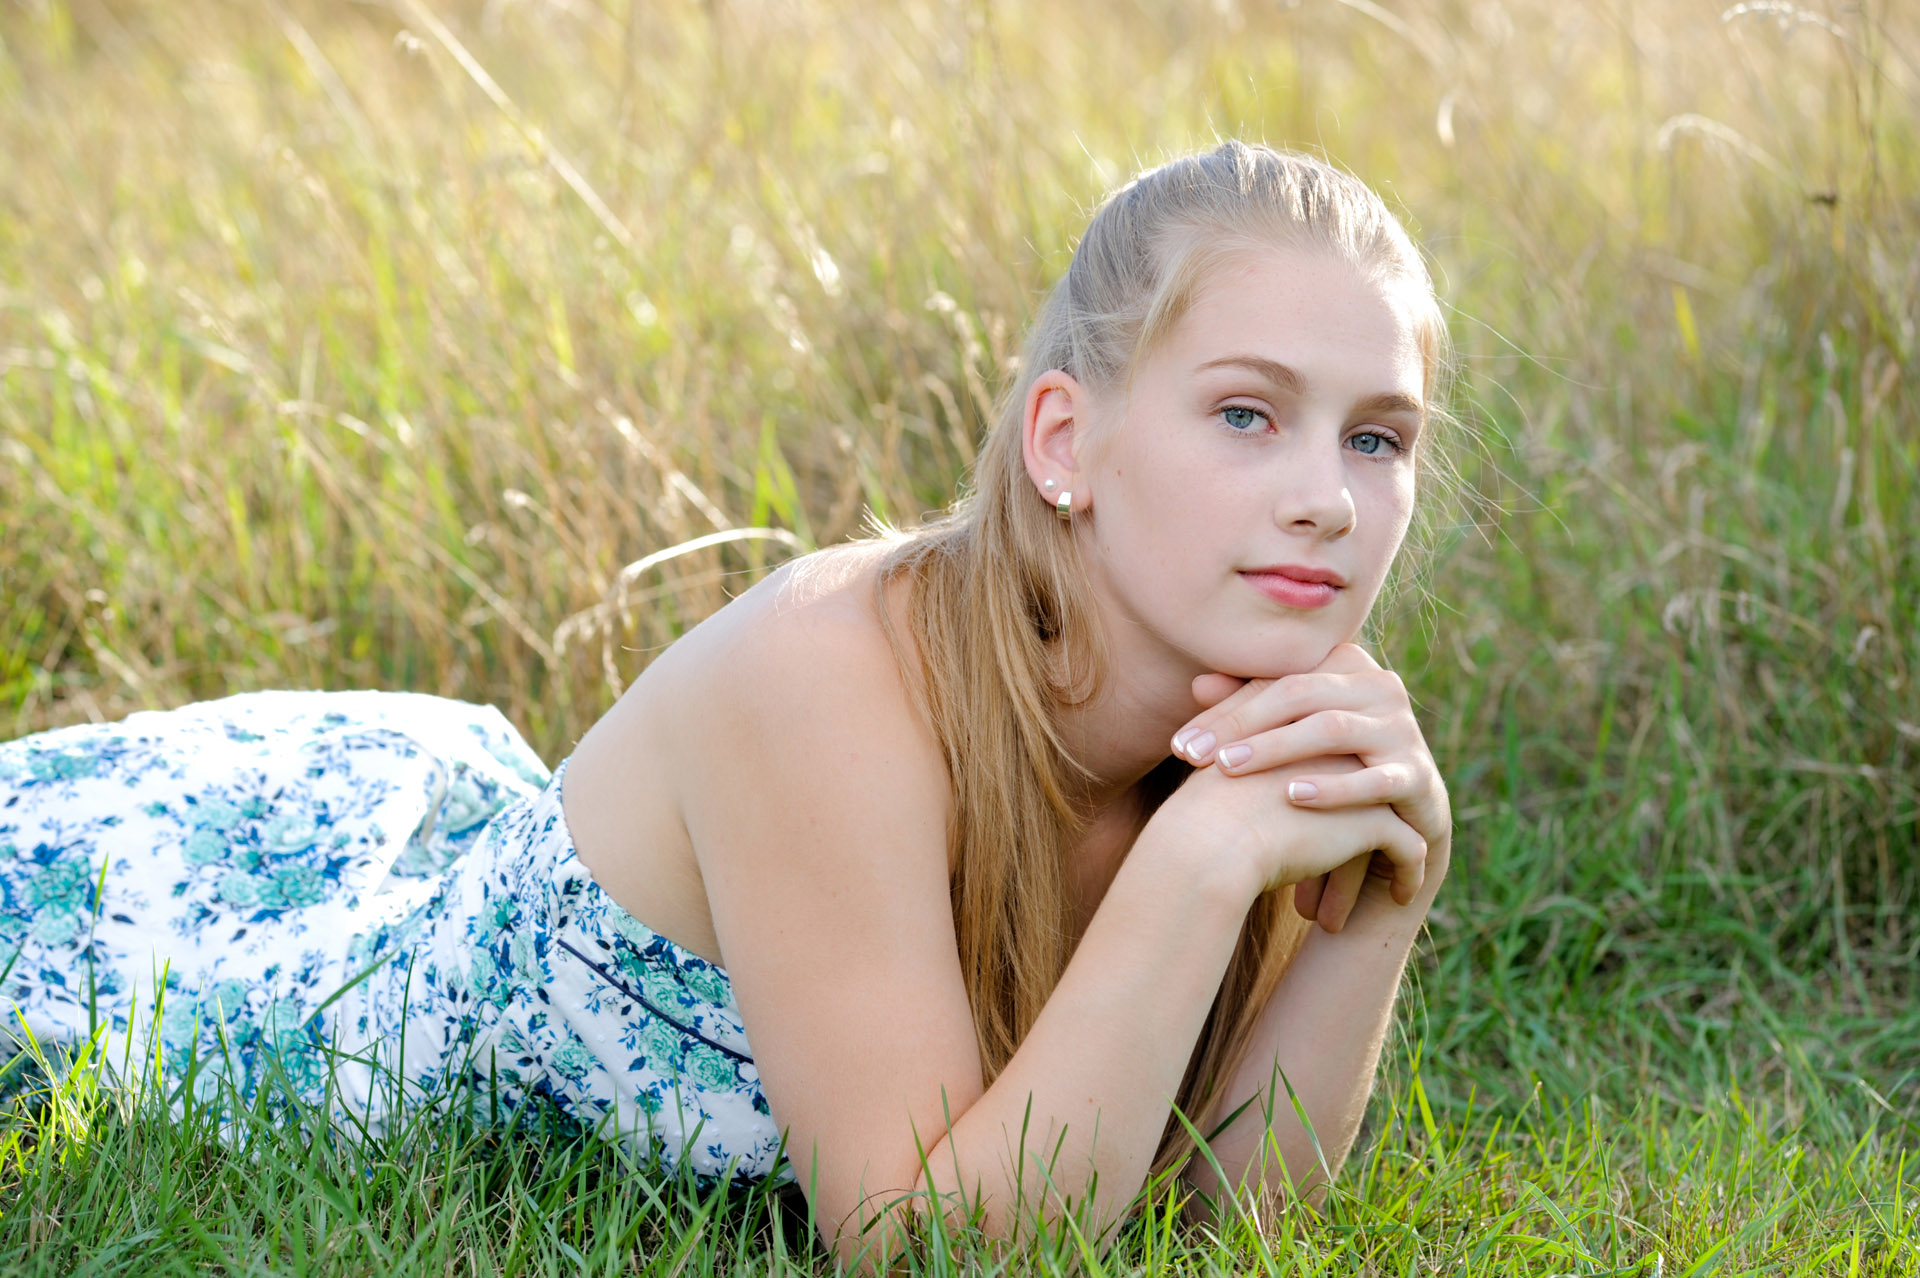 Troy, Michigan senior pictures portrait of the high school senior posing in a field for her senior pictures in Troy, Michigan.